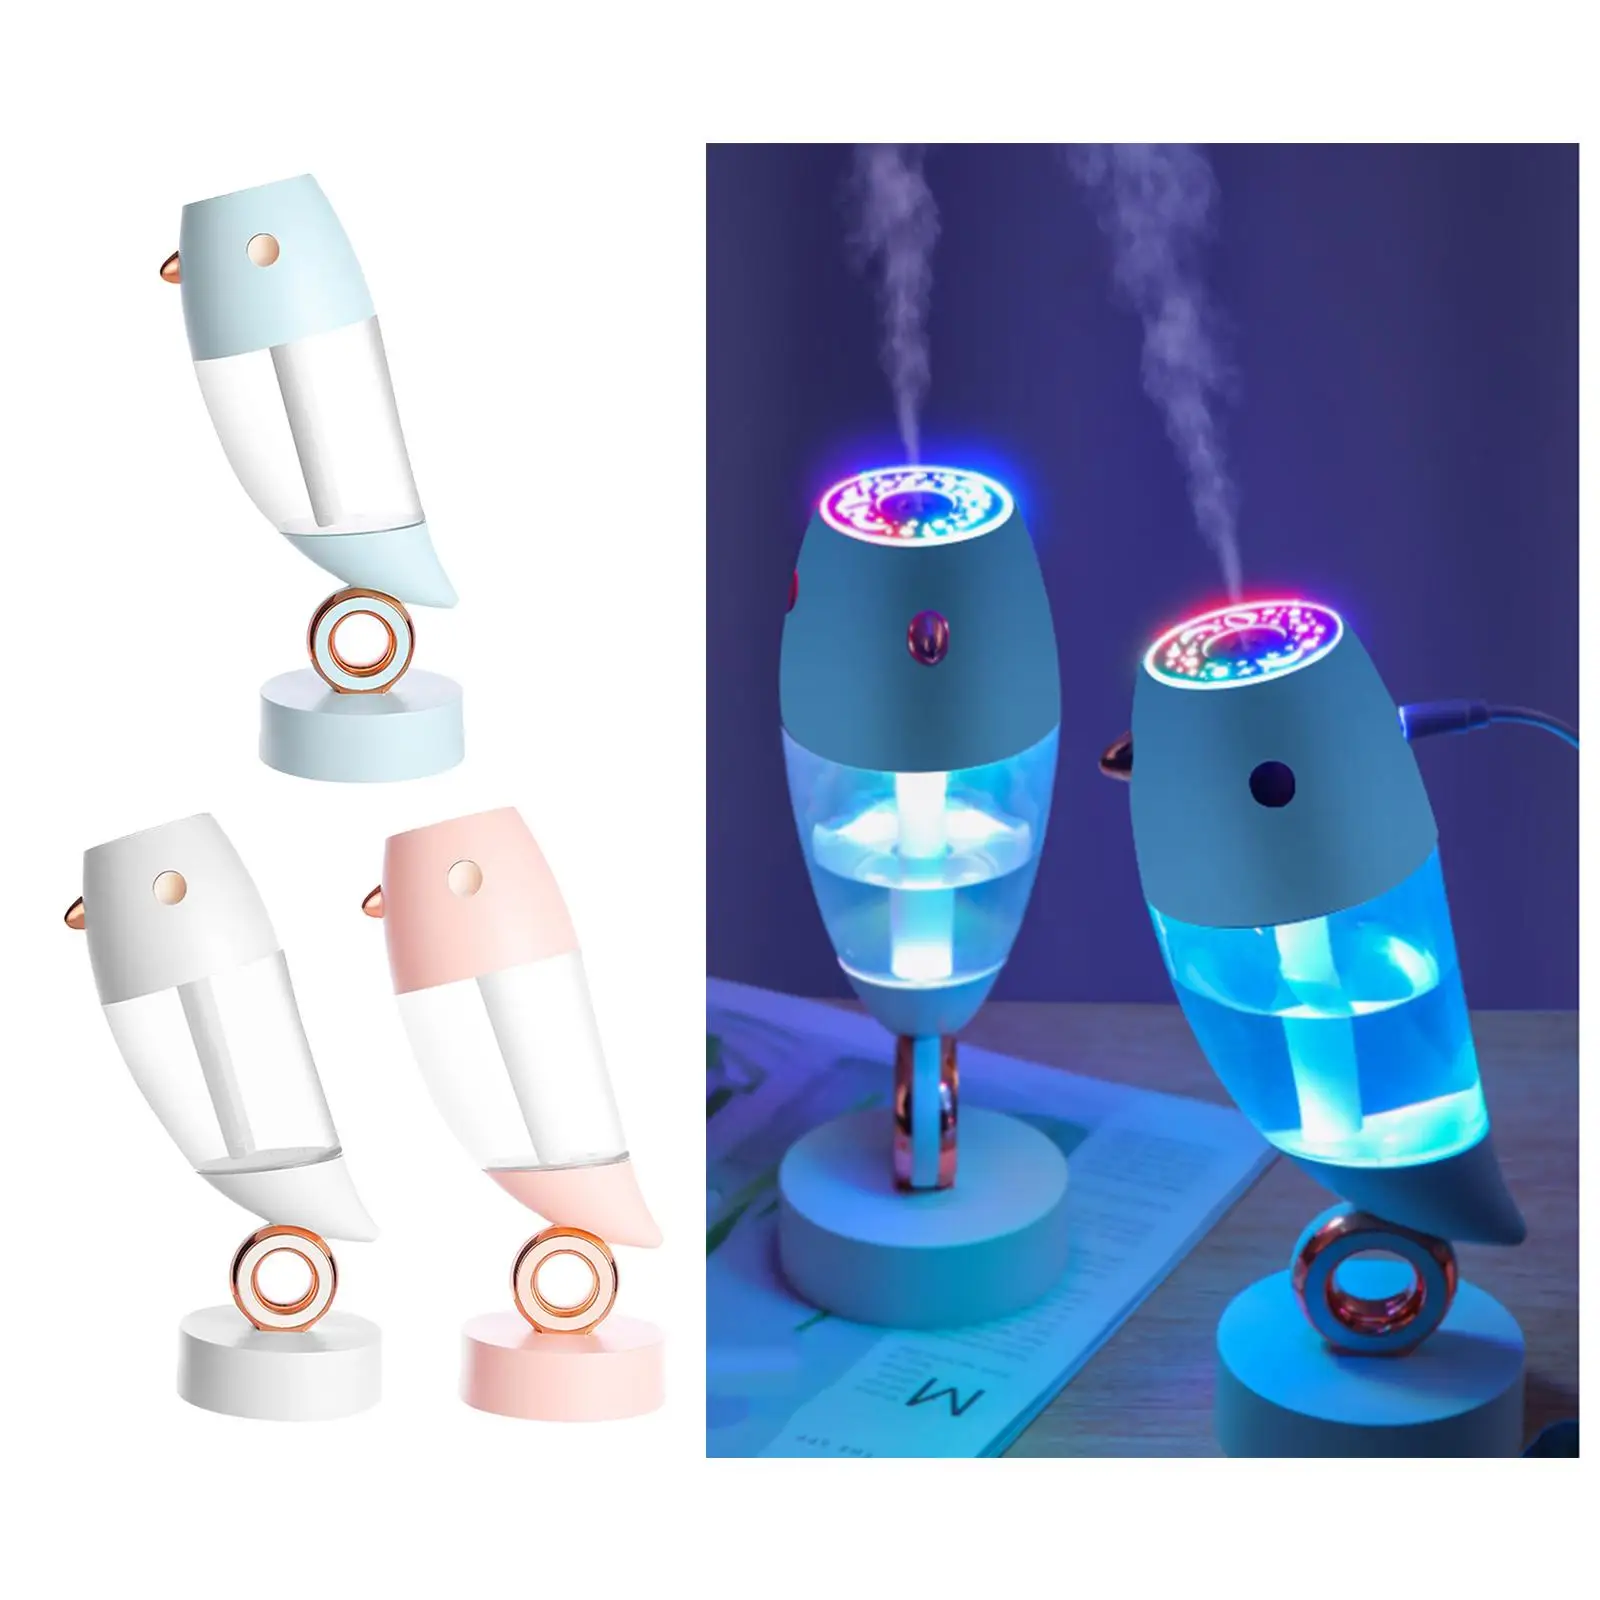 Humidifiers with Star Screen Projector, Night Light, Cold Mist Humidifier, USB Air Diffuser, Best Gift for